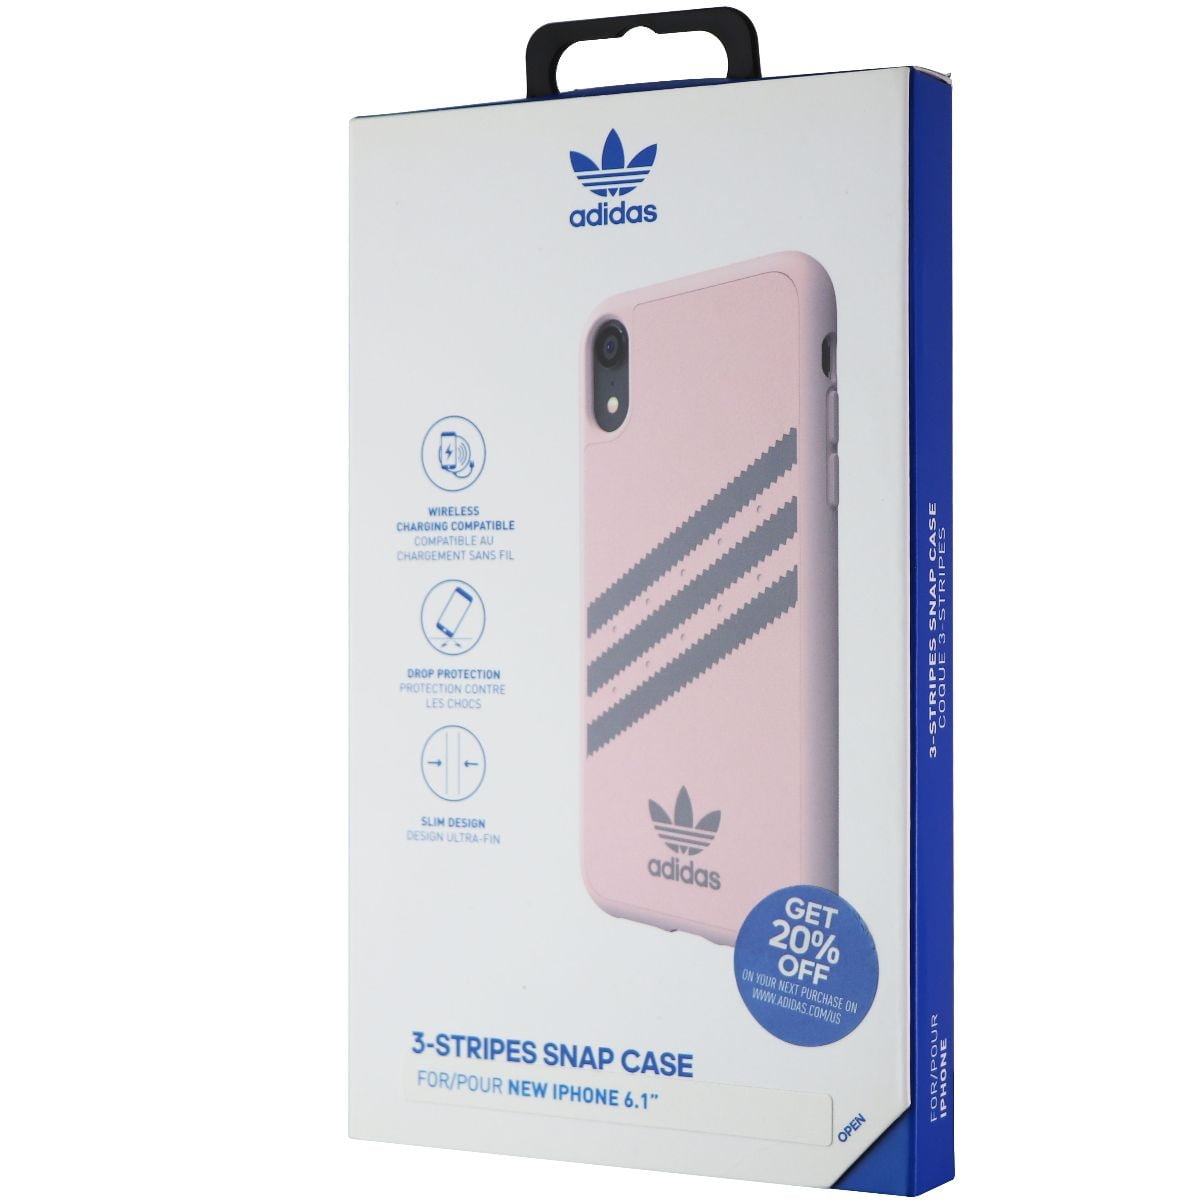 Adidas 3-Stripe Snap Case for Apple iPhone XR - Pink and Gray